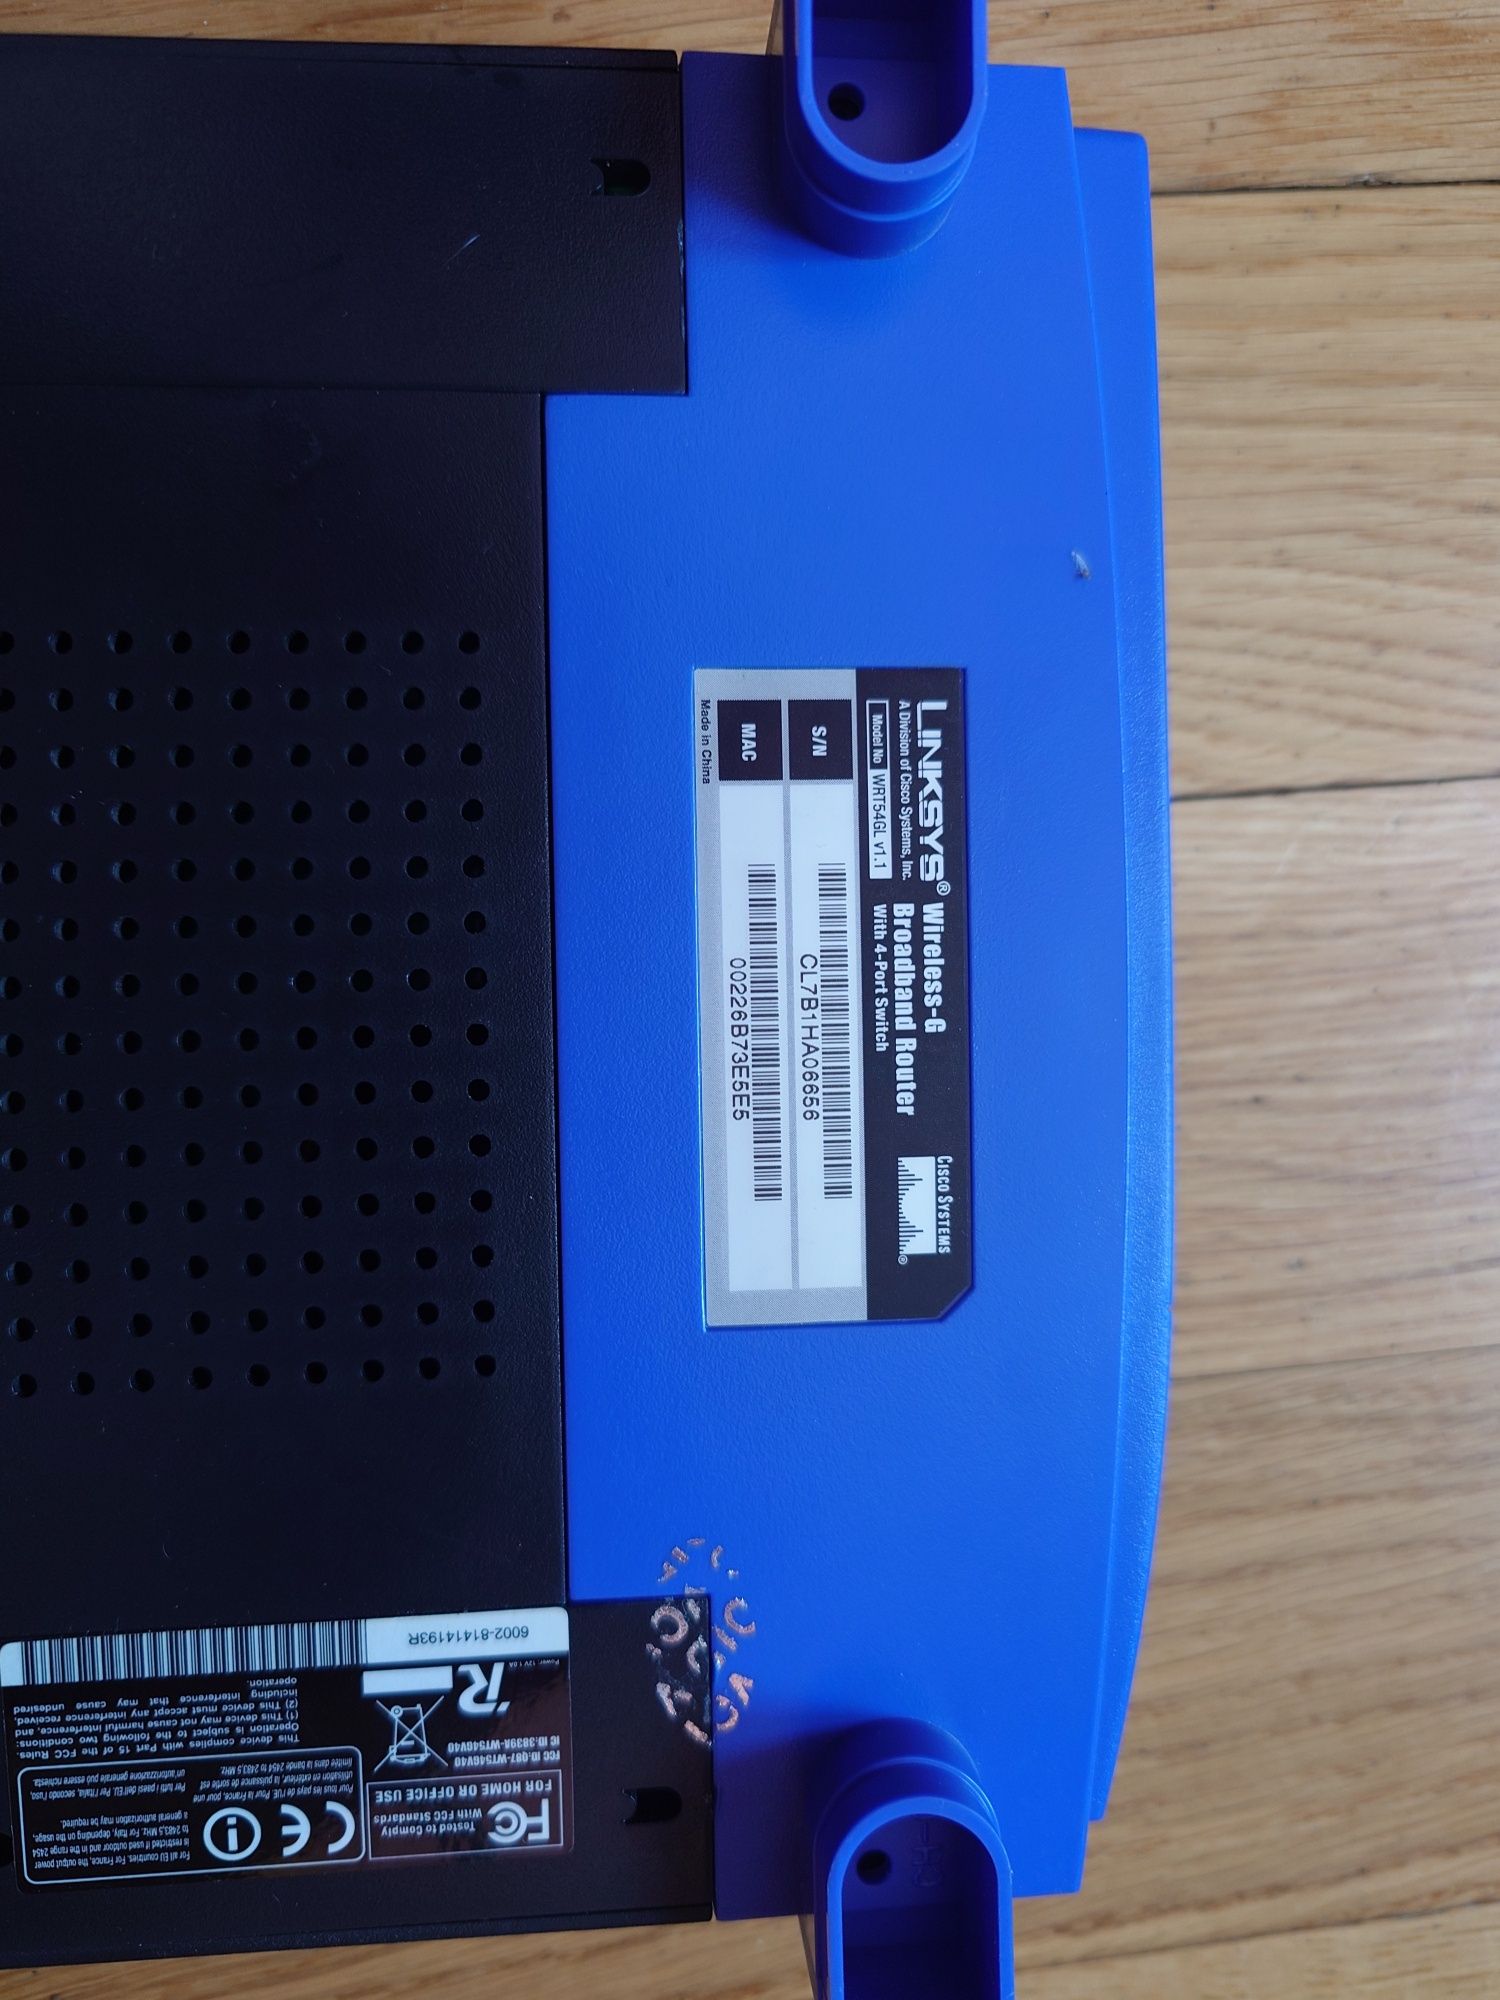 Linksys Router WRT54GL